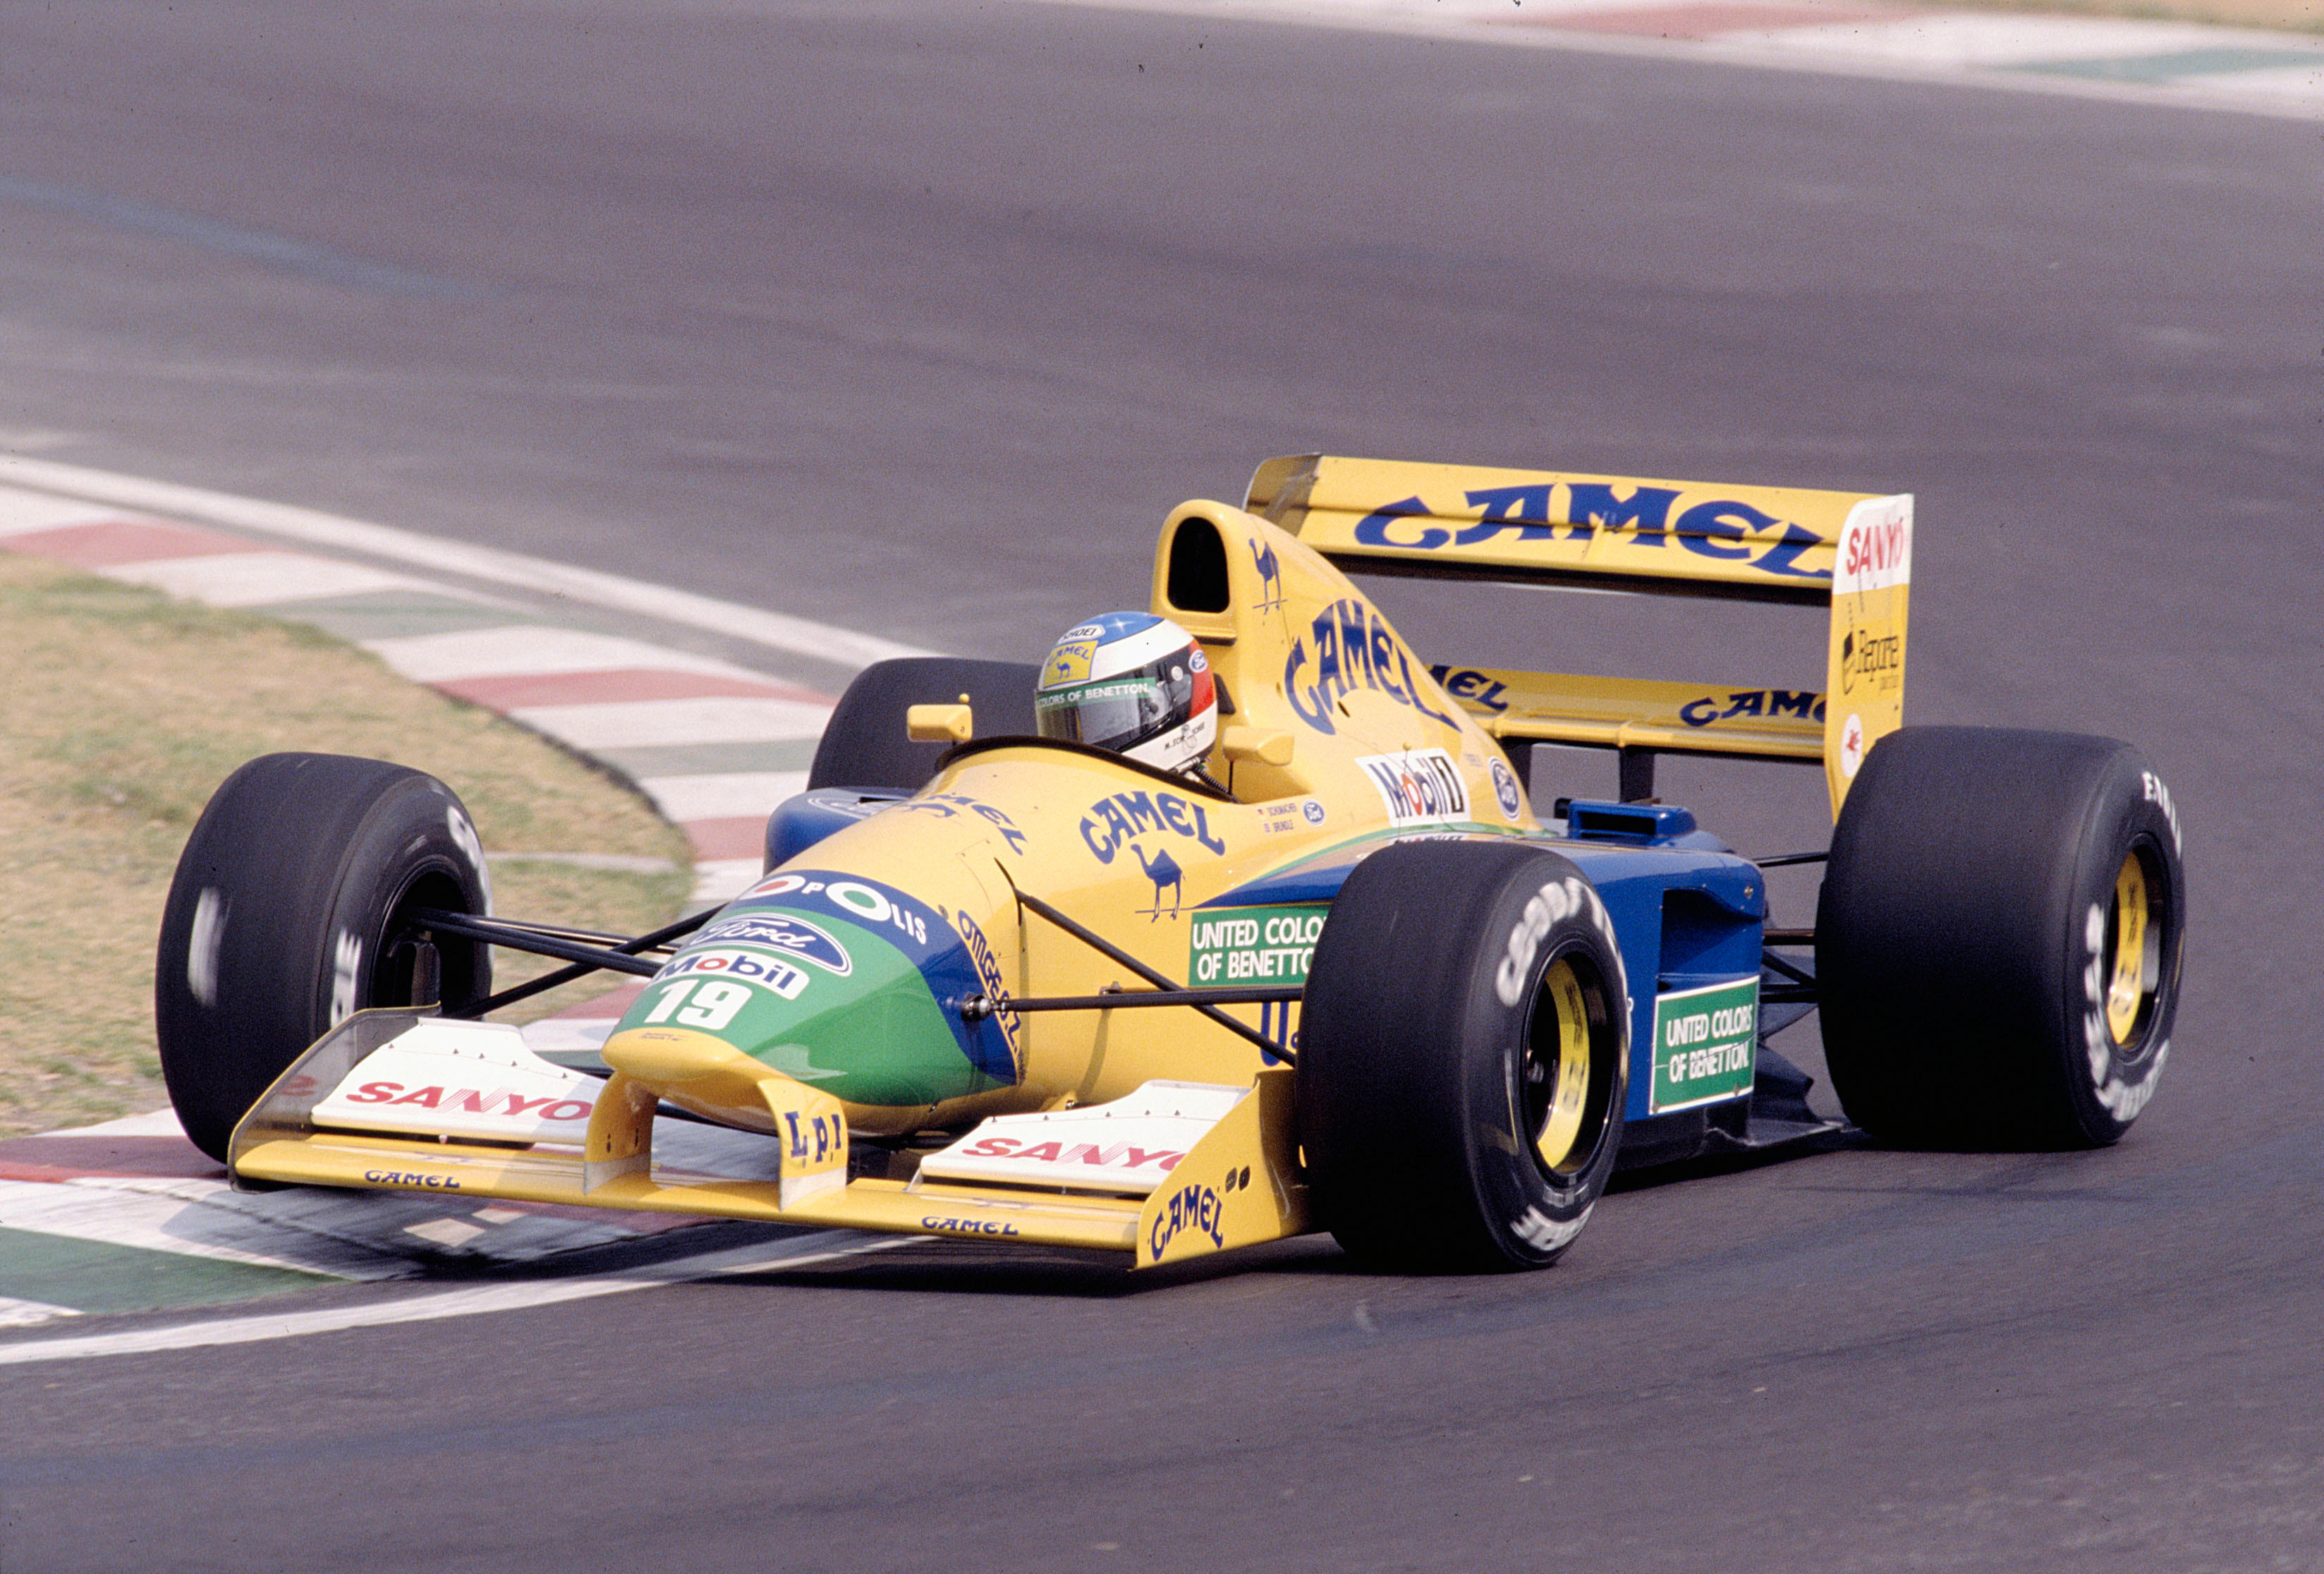 Benetton Martin Brundle Of Great Britain Of The Camel Benetton Ford OLD F1 RACING PHOTO 